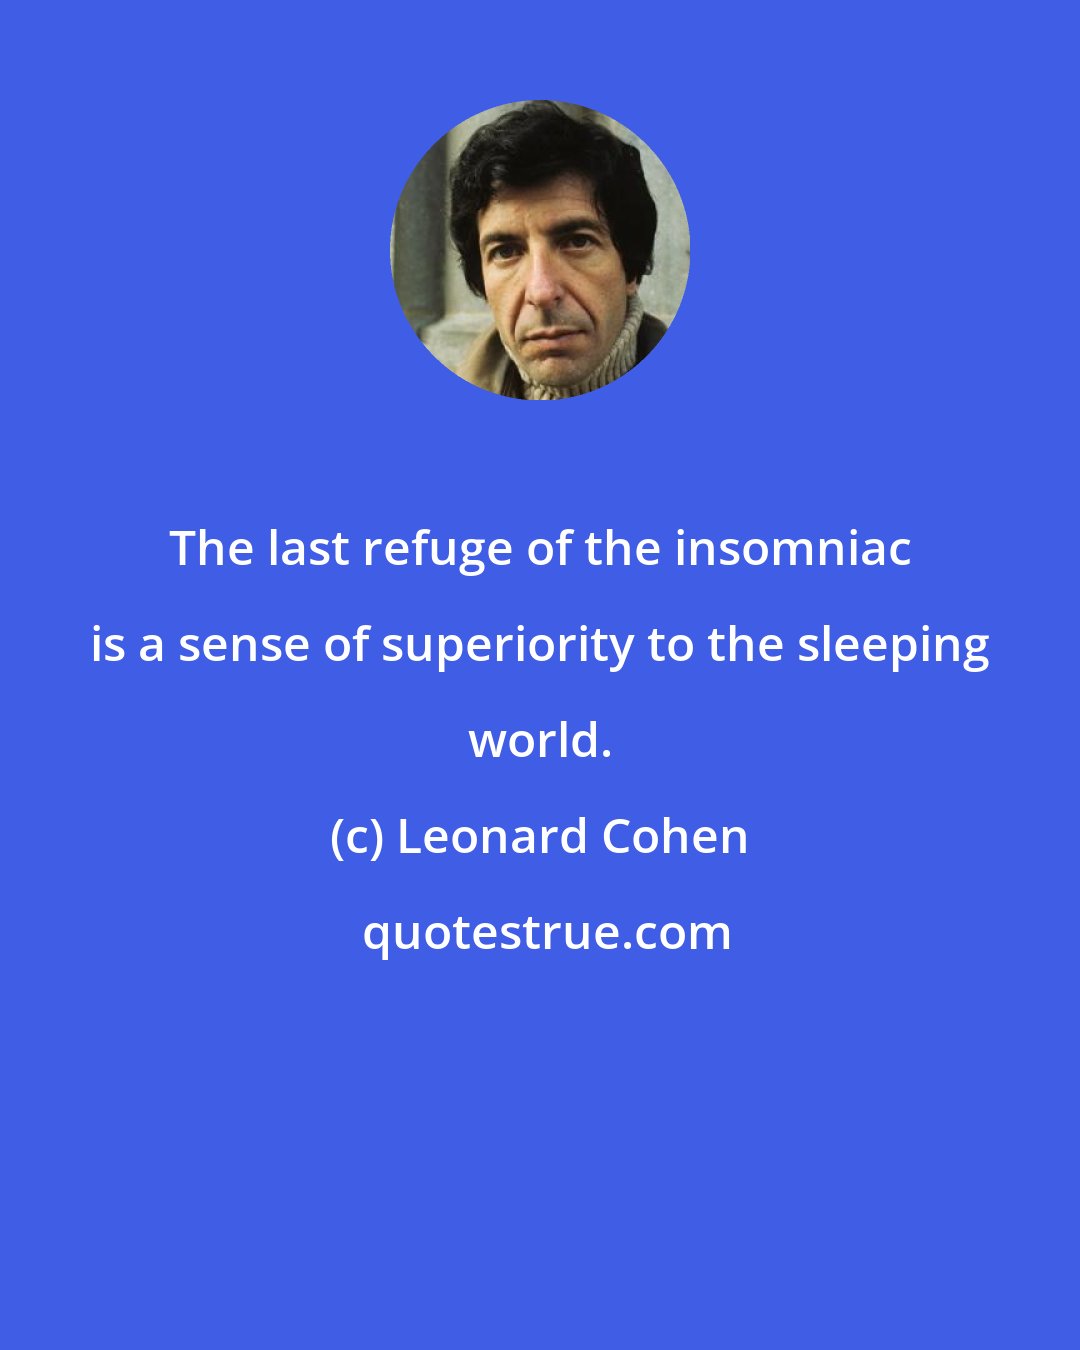 Leonard Cohen: The last refuge of the insomniac is a sense of superiority to the sleeping world.